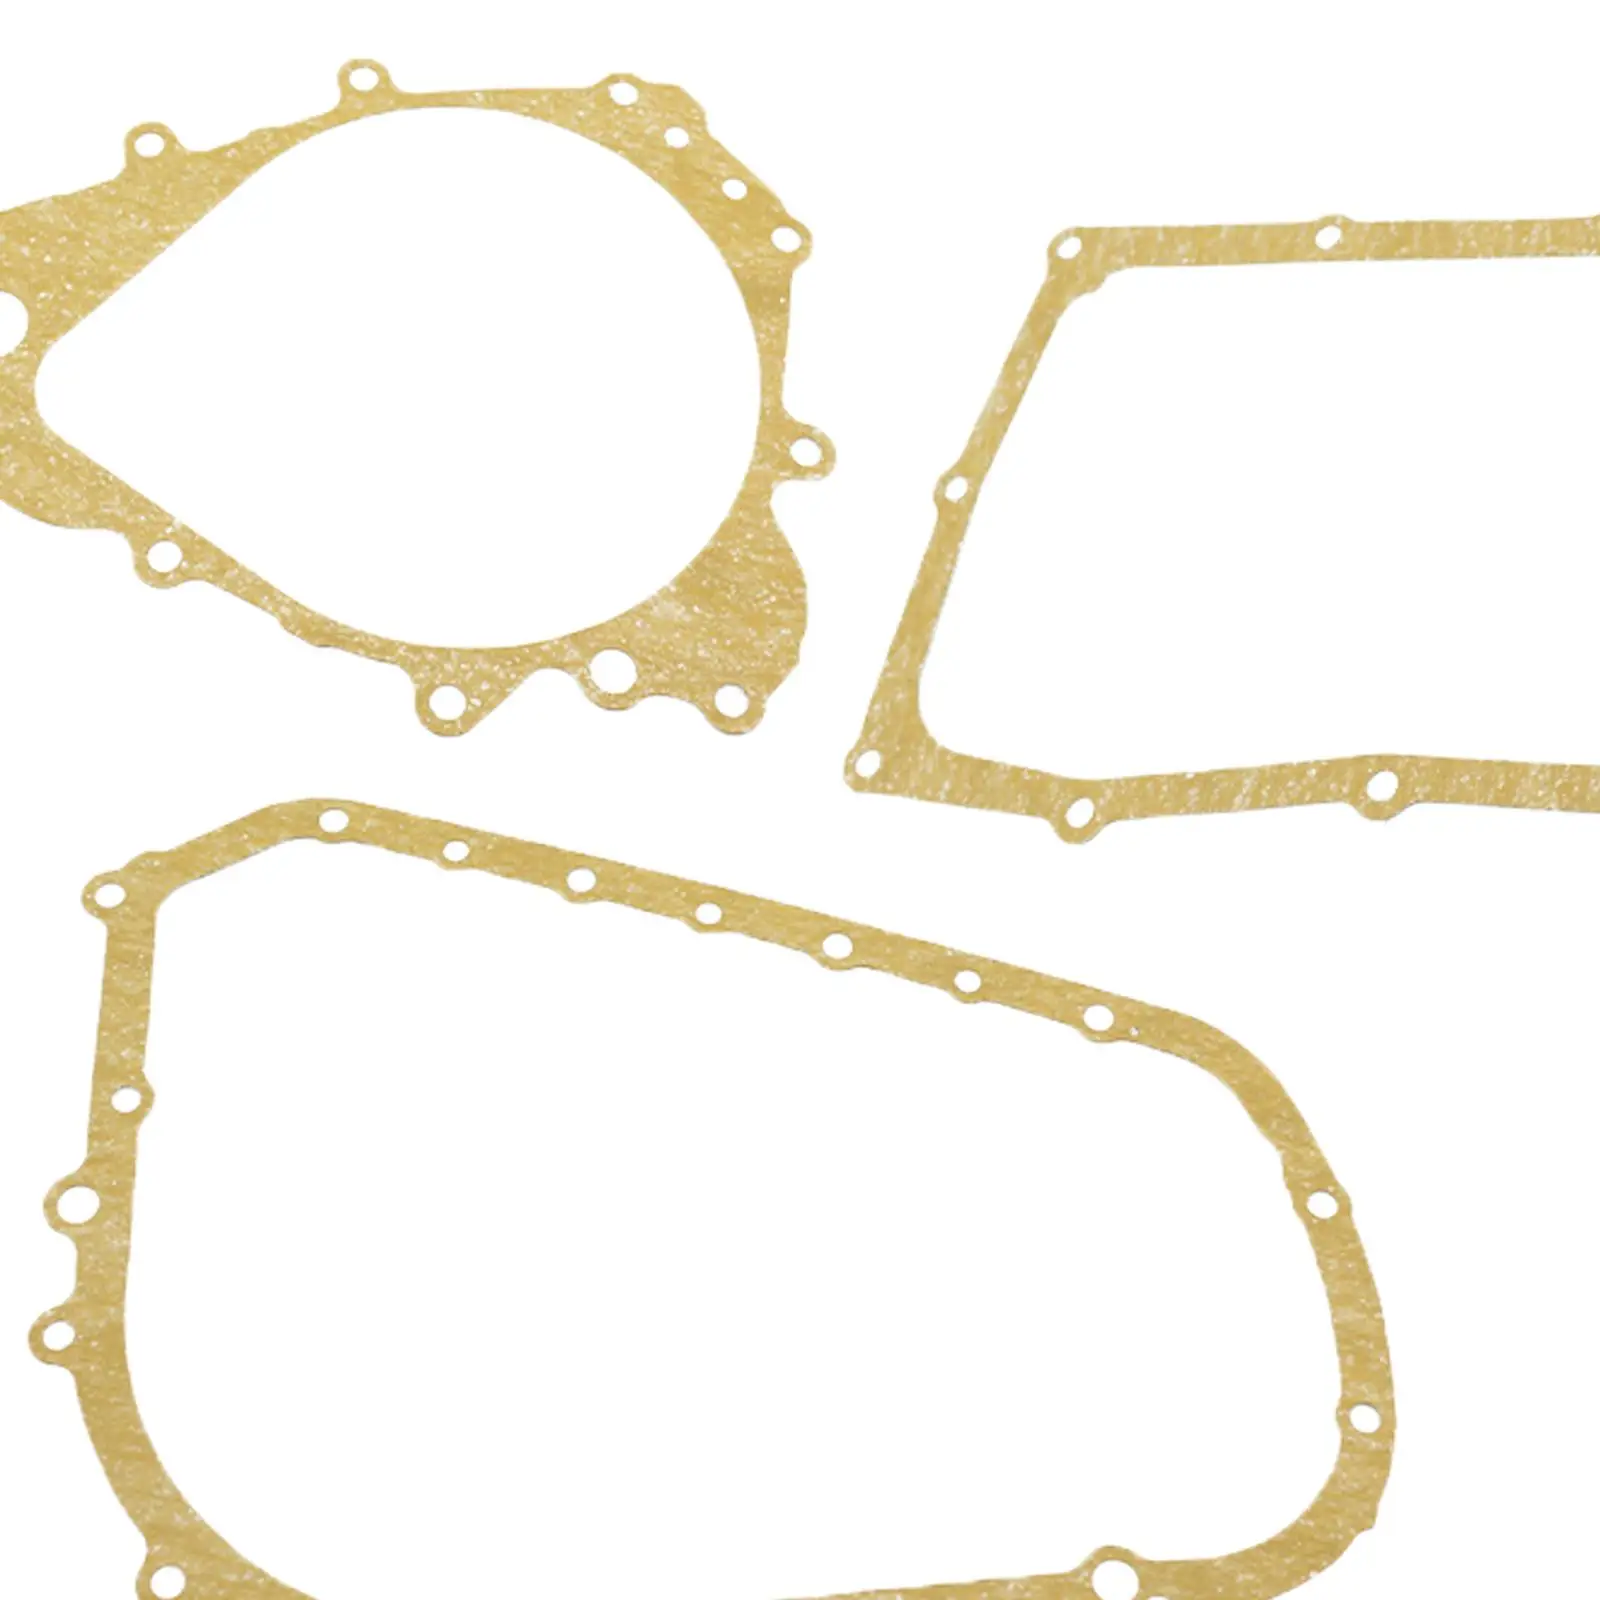 Clutch Oil Pan Cover Gasket Replaces for Suzuki Accessories